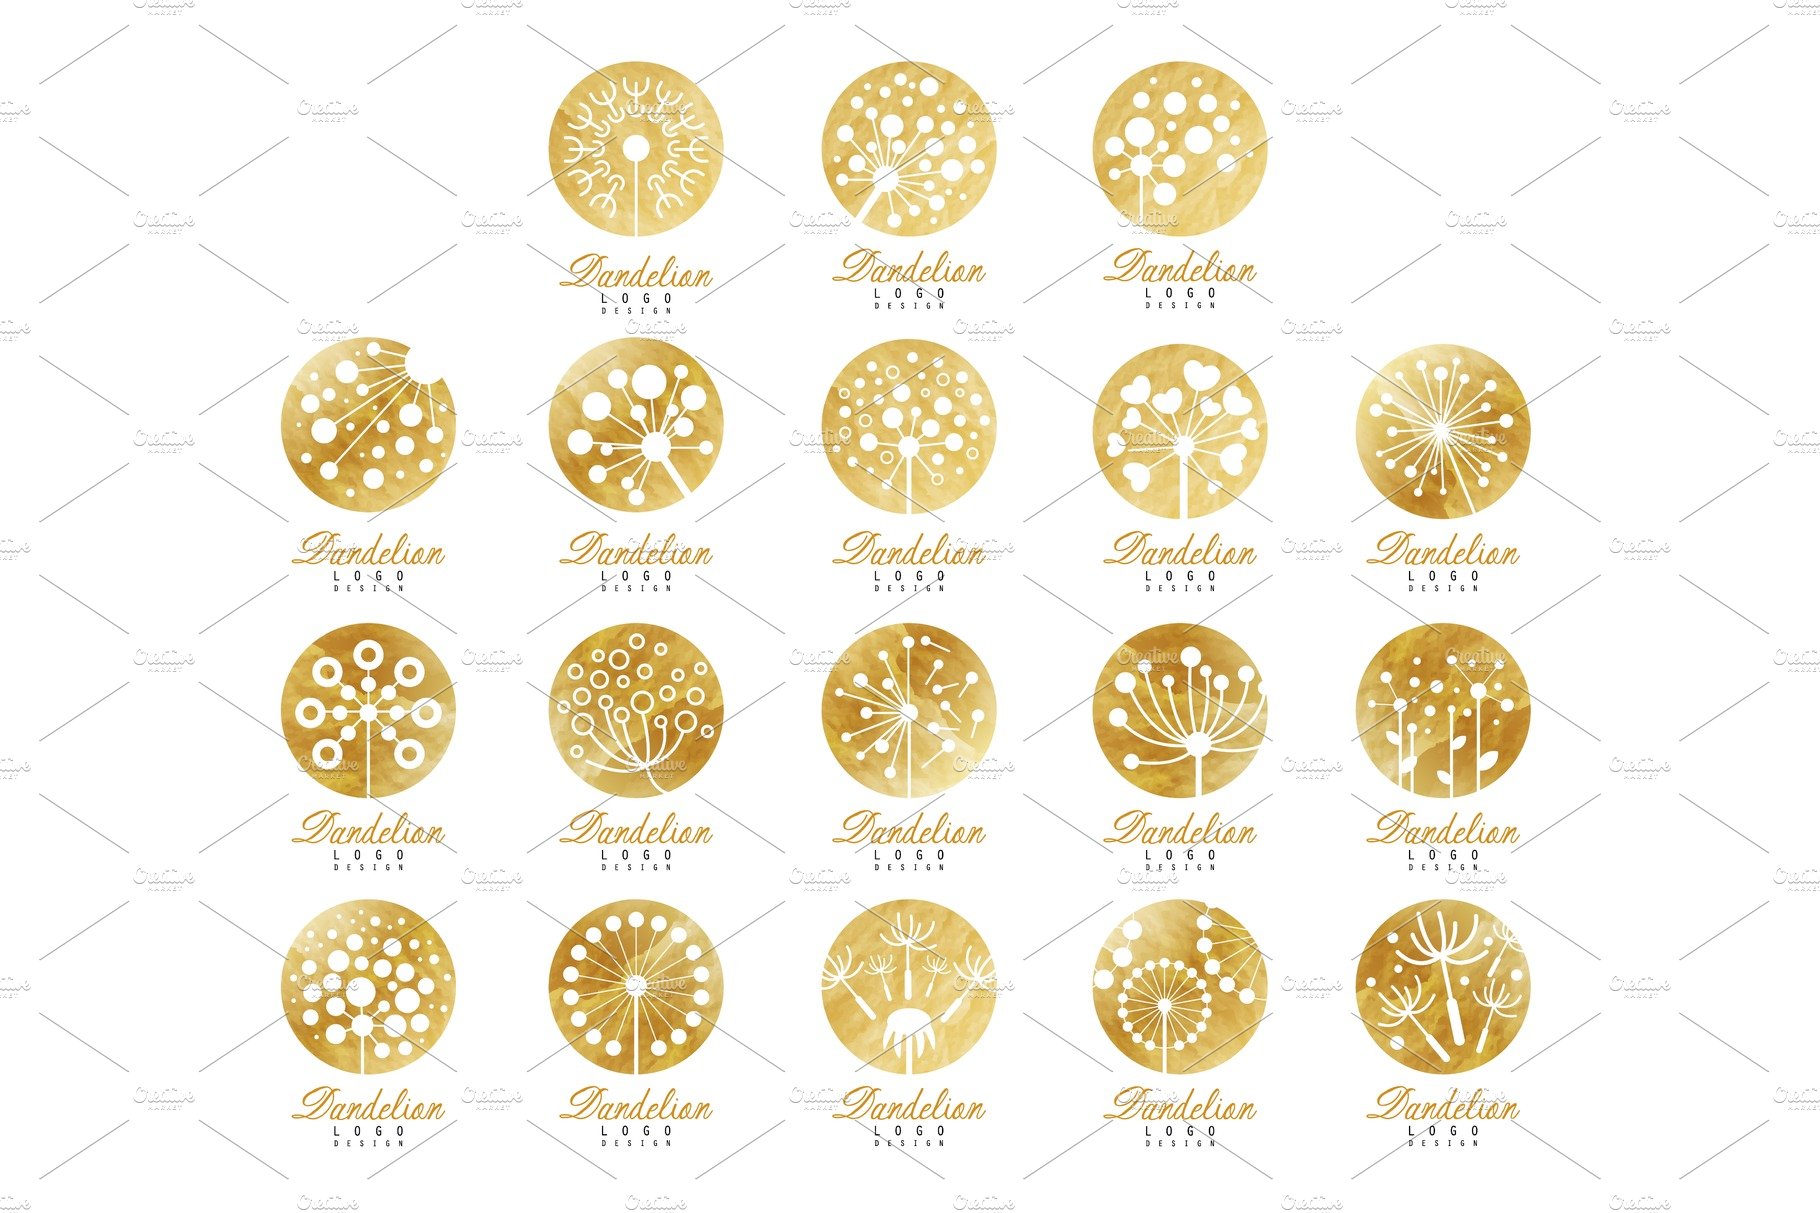 Dandelion logo template set, beautiful nature badge for your own design vec... cover image.